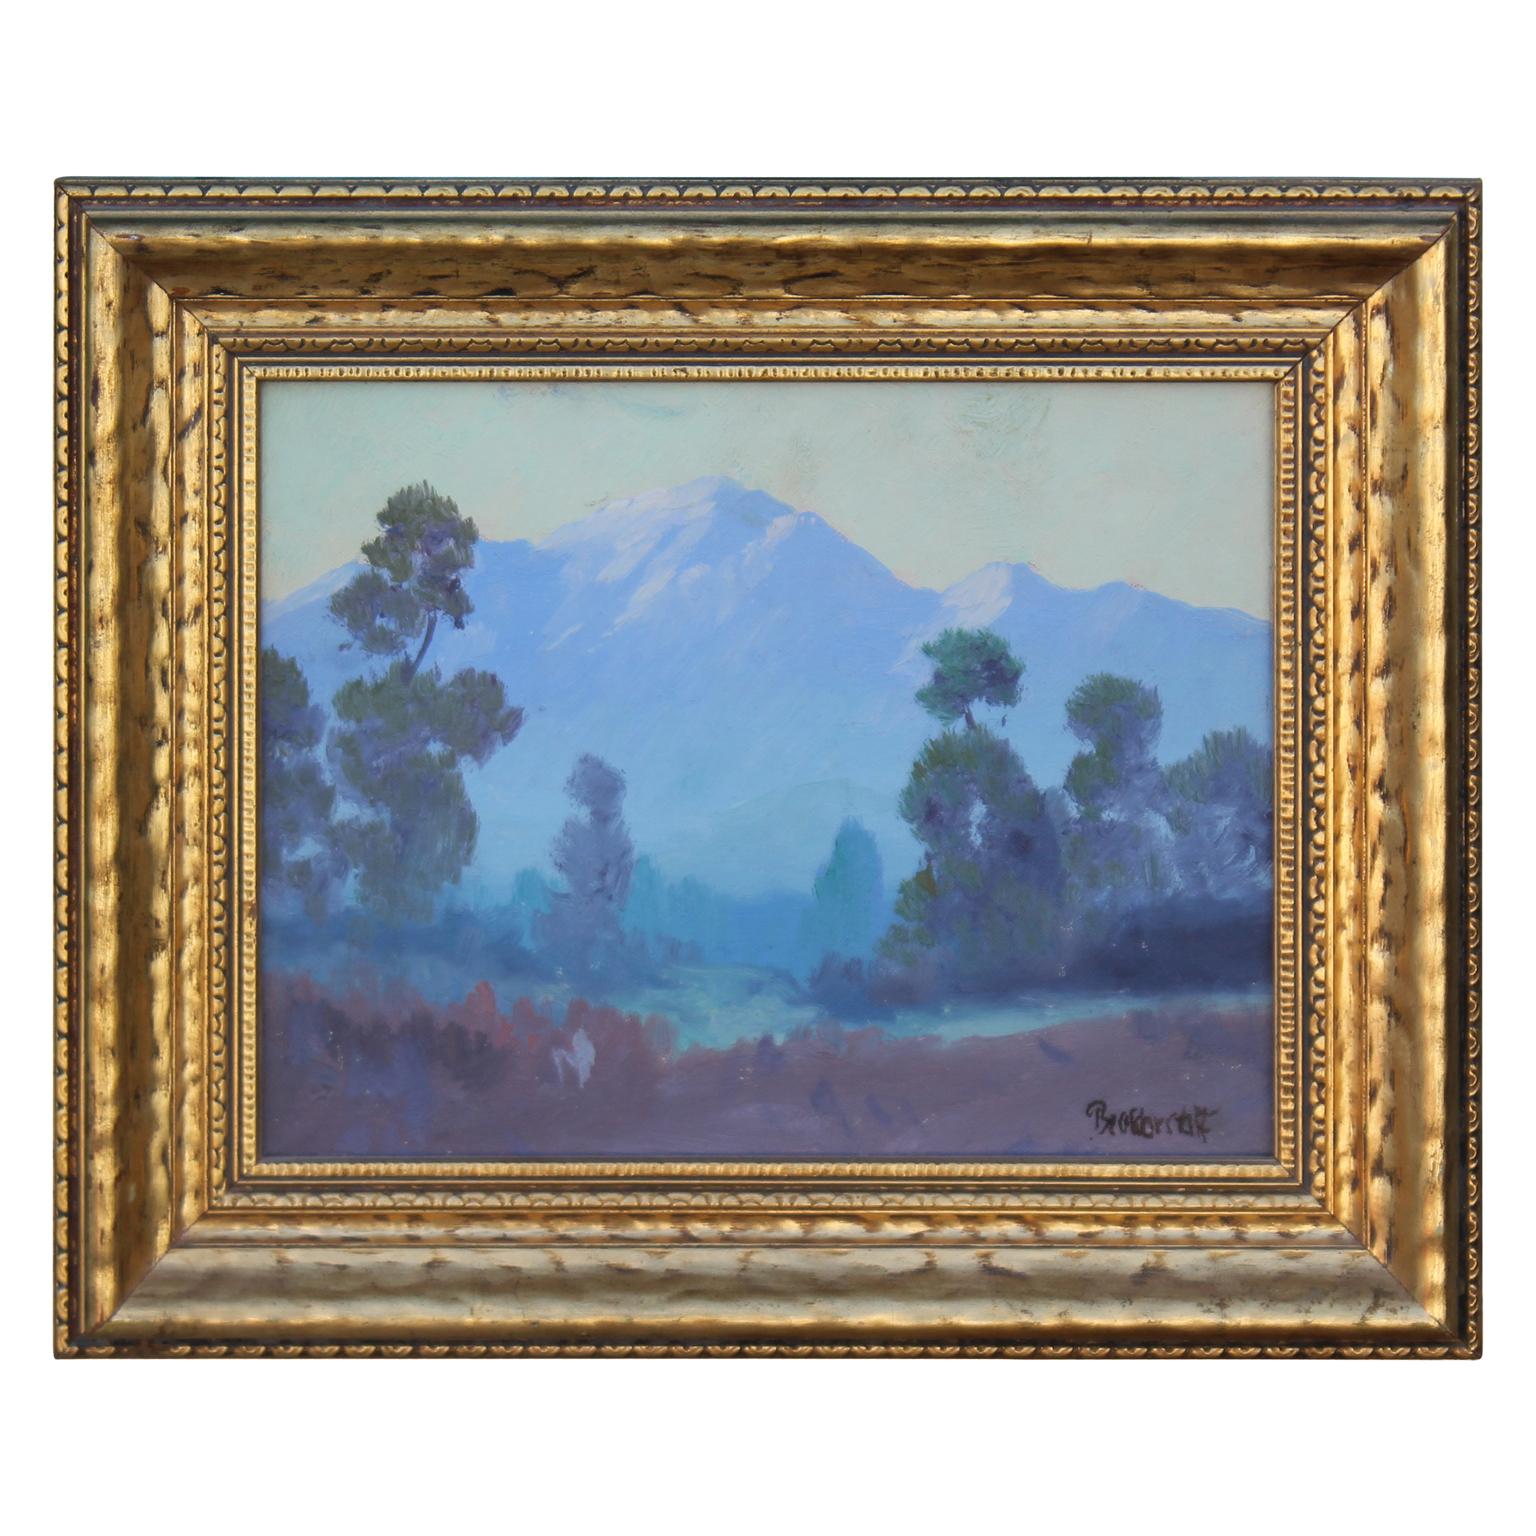 California Mountain Landscape - Painting by George Sanders Bickerstaff